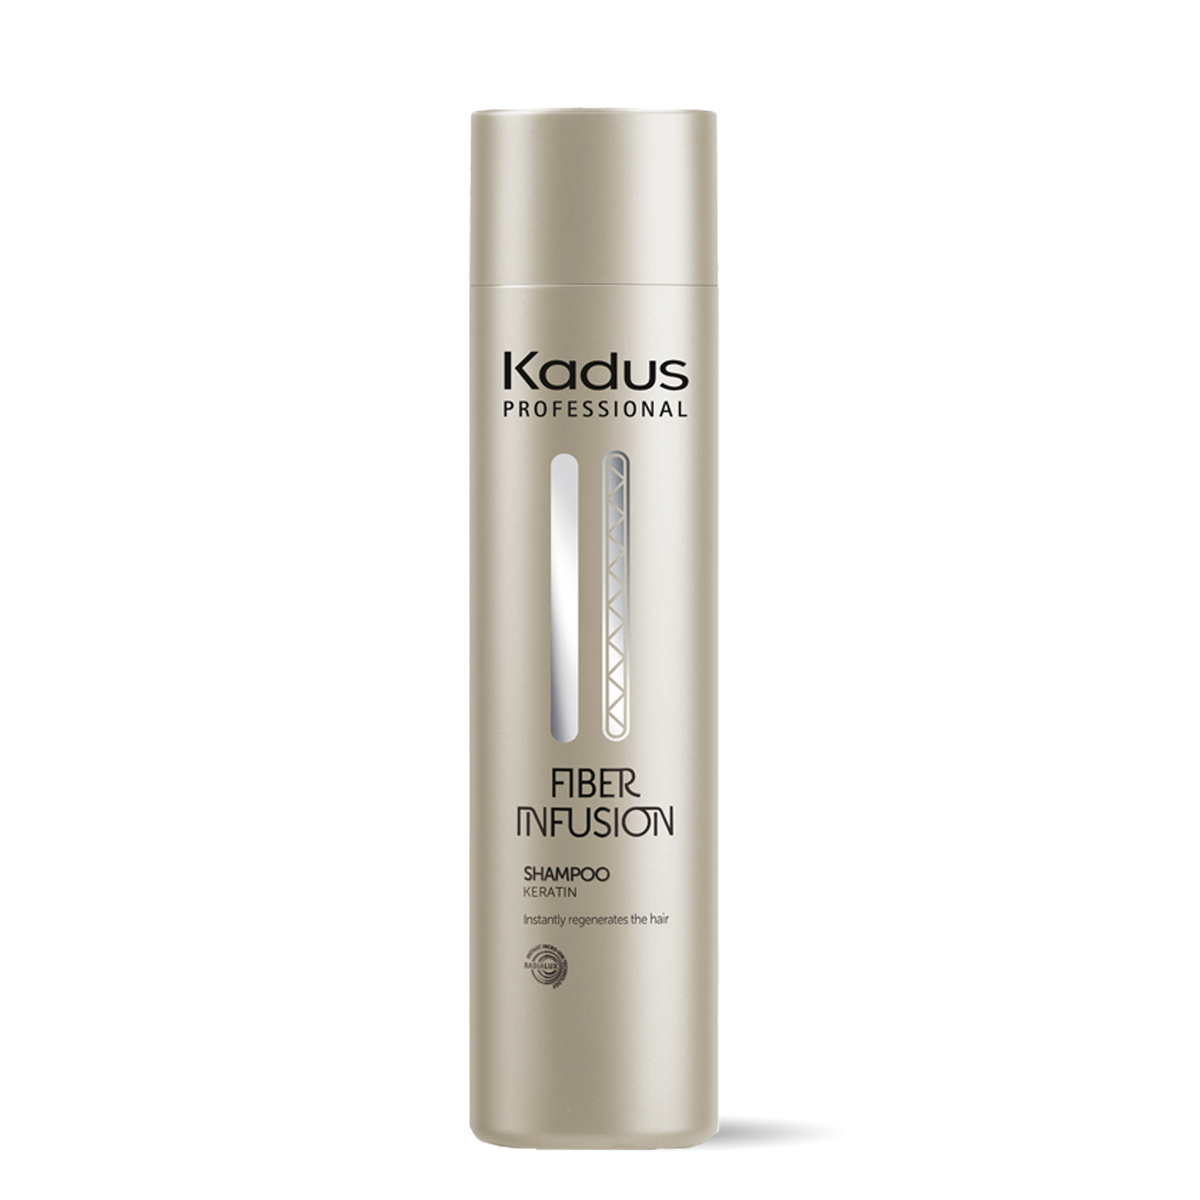 Kadus Fiber Infusion Shampoo 250ml - by Kadus Professionals |ProCare Outlet|